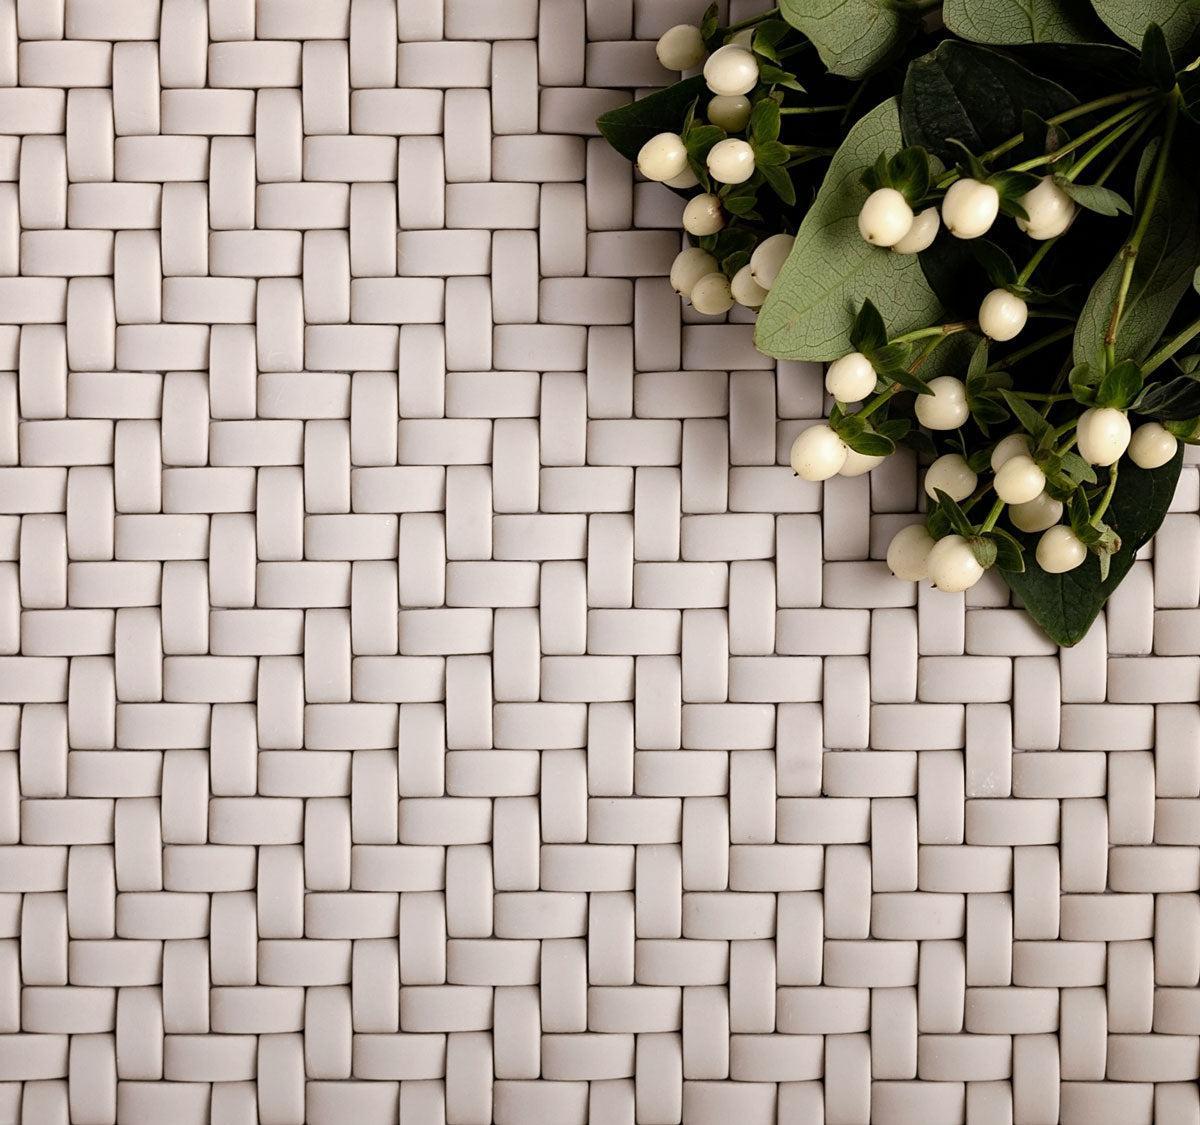 Cream Recycled Glass Basket Weave Mosaic Tile